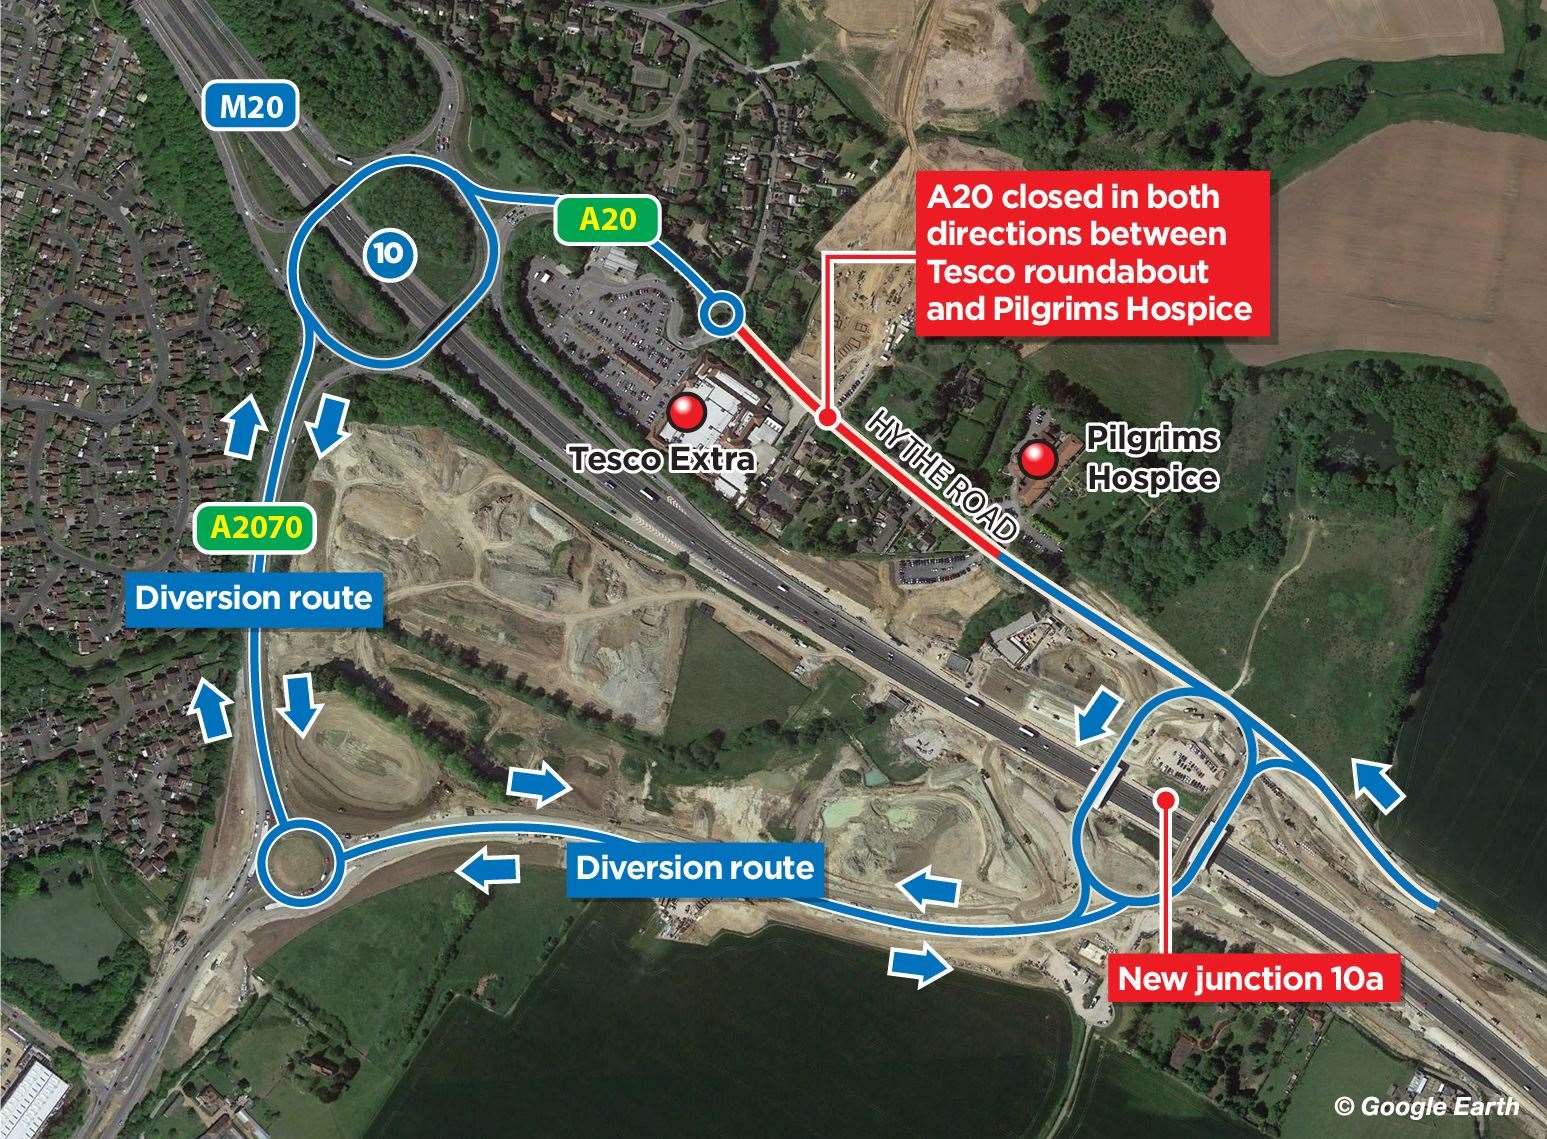 The diversion route uses the new A2070 link road